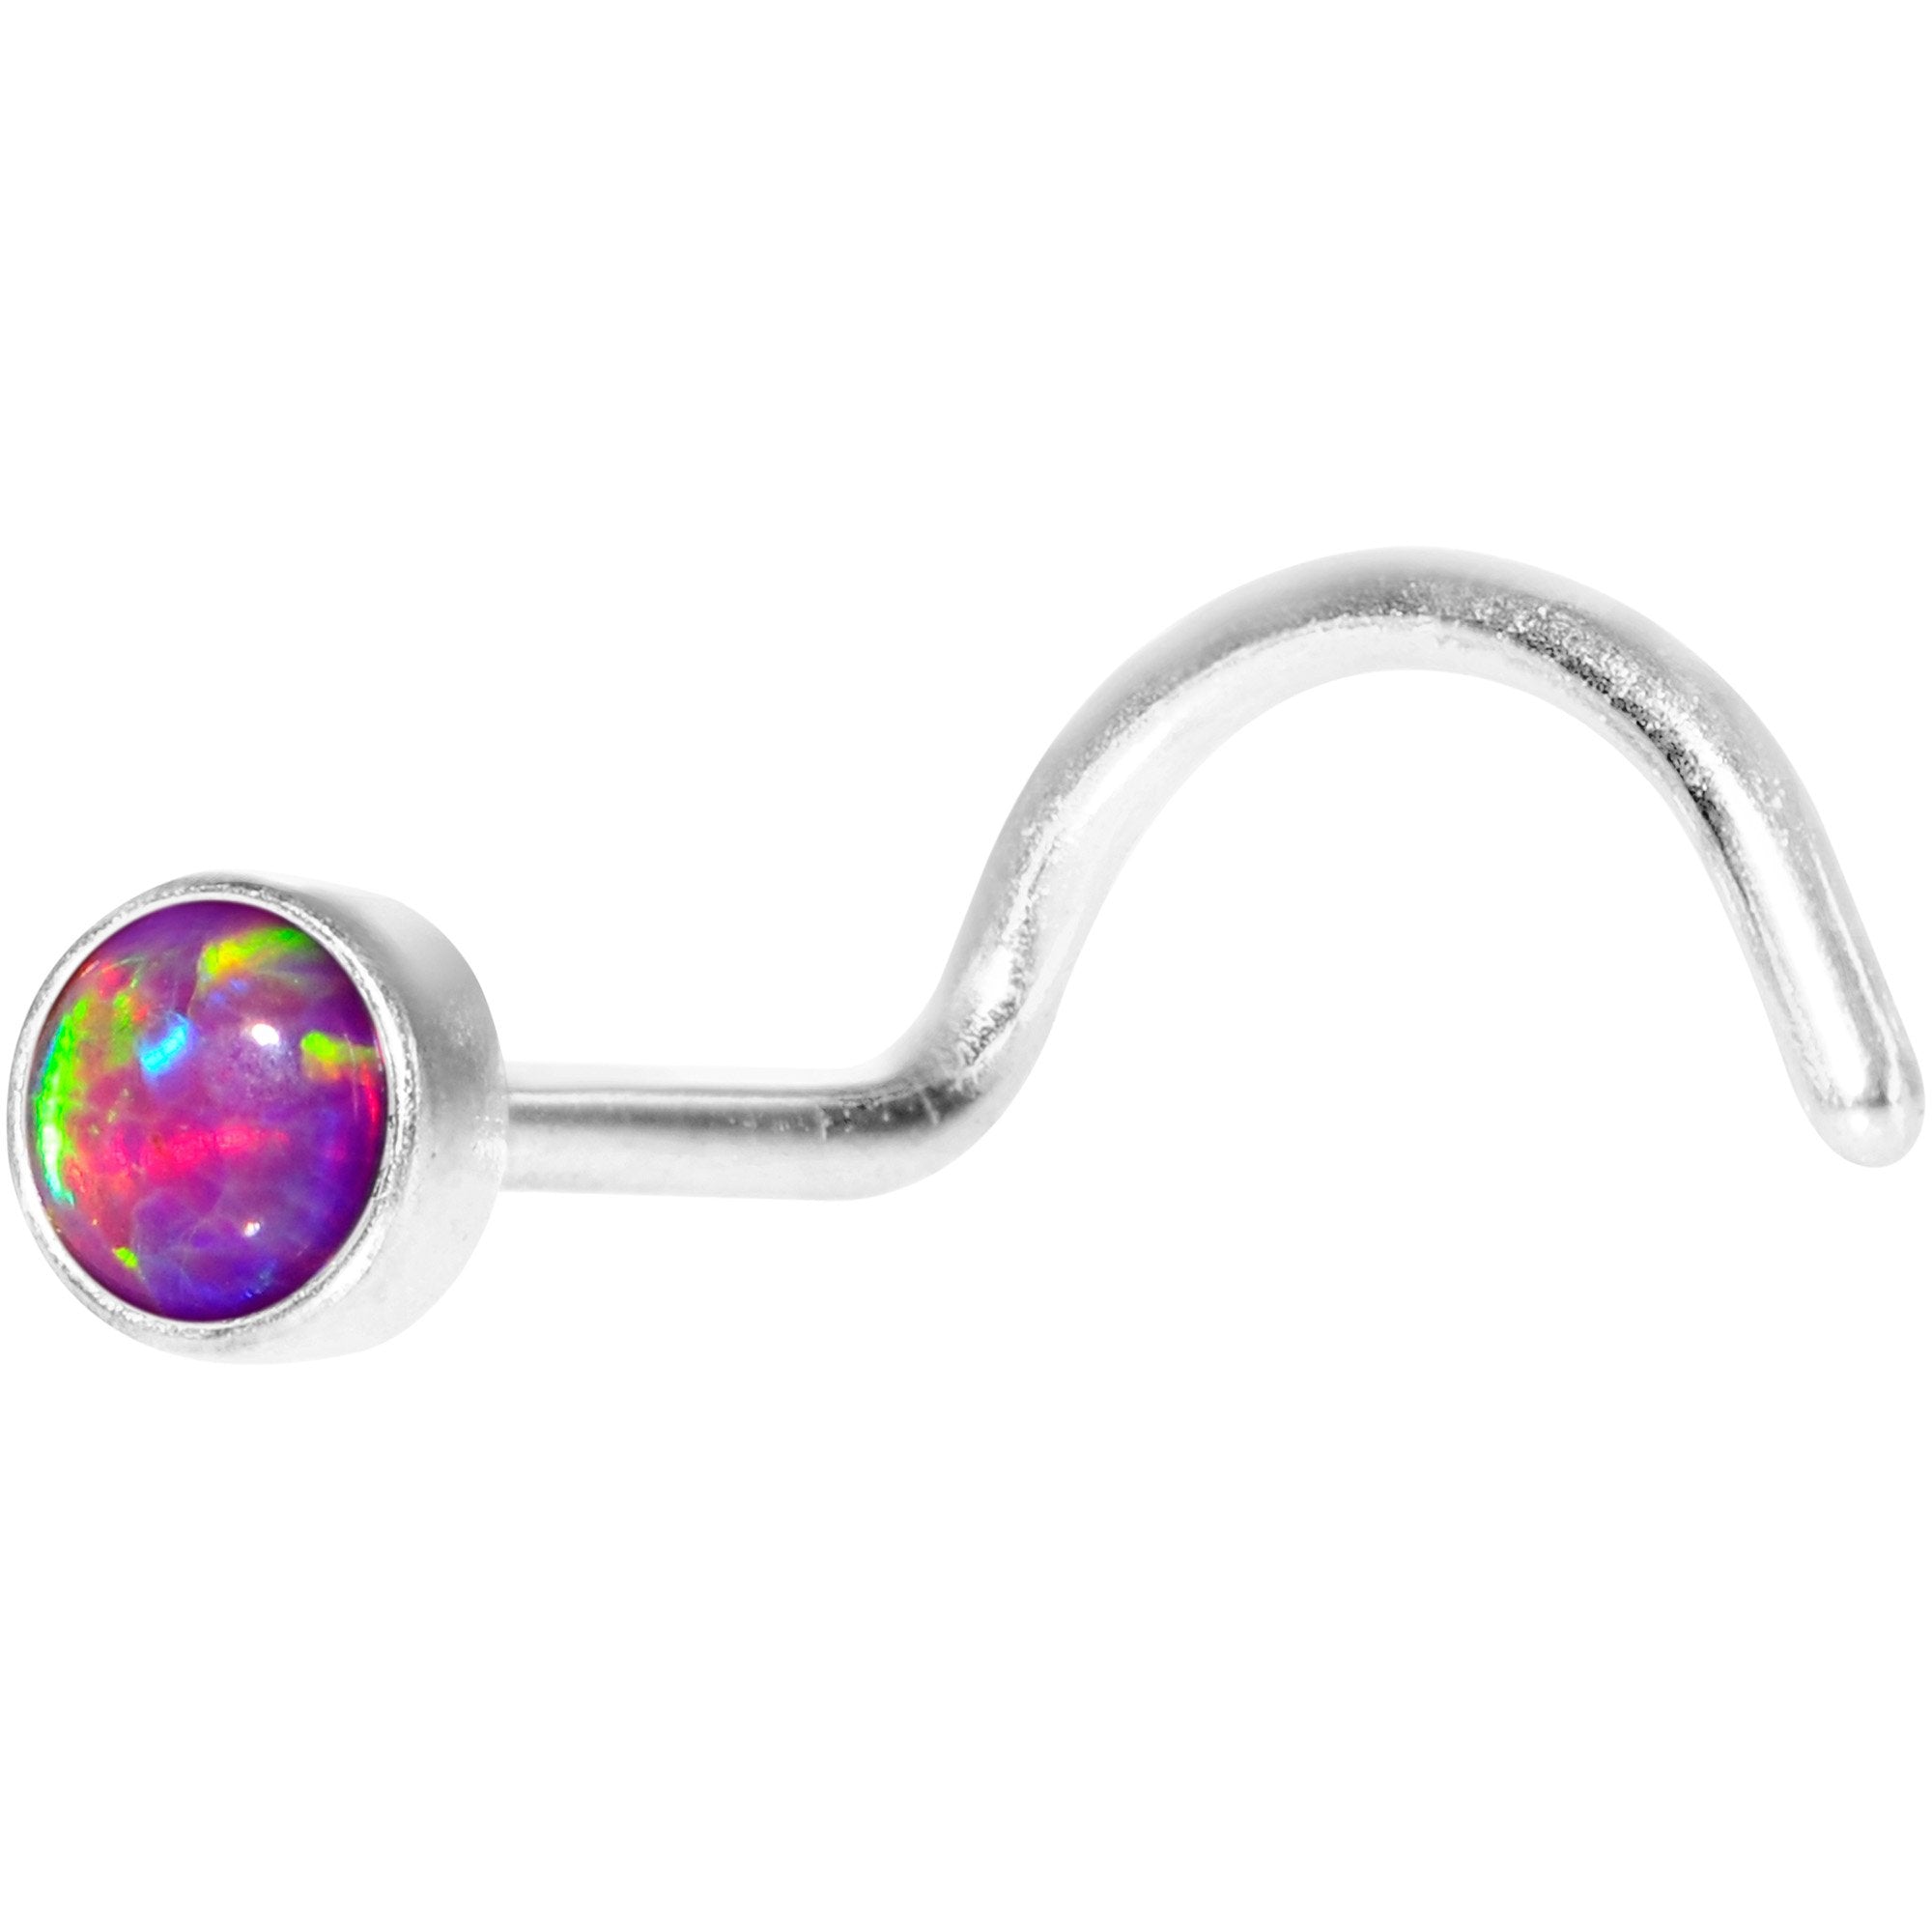 Purple 3mm Synthetic Opal Press Fit Left Nose Screw